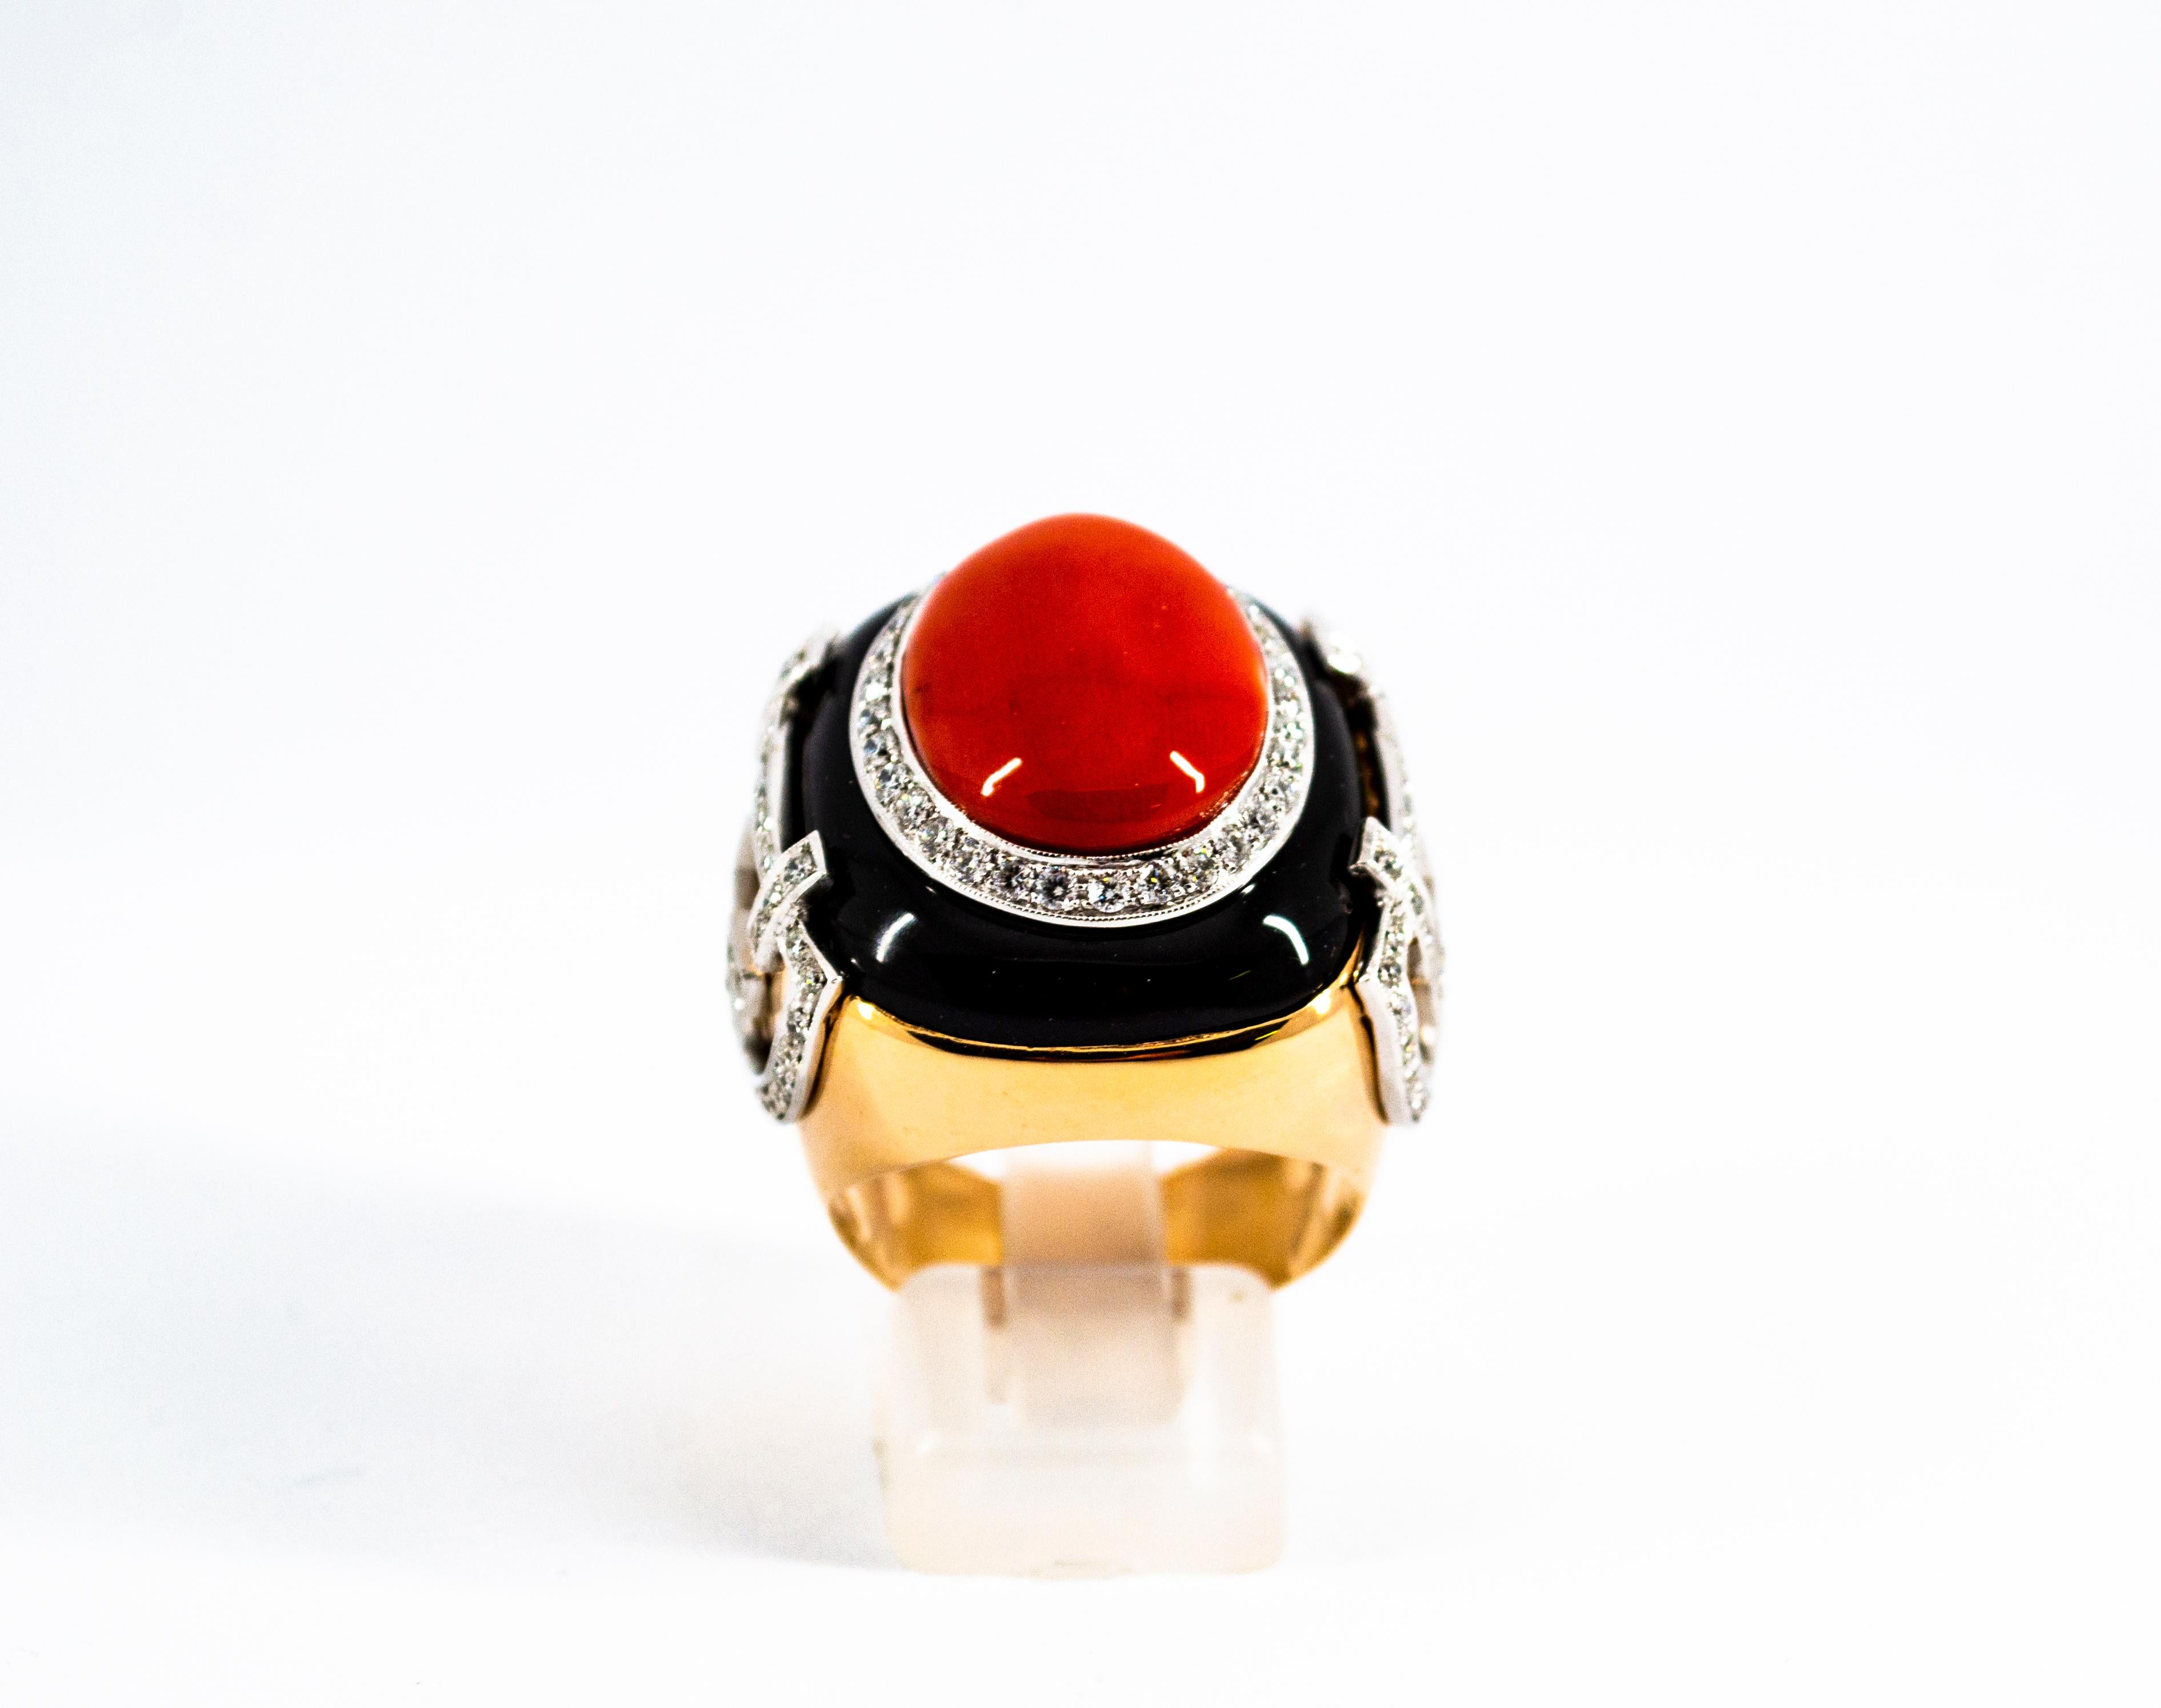 This Ring is made of 14K Yellow Gold.
This Ring has 1.00 Carats of White Modern Round Cut Diamonds.
This Ring has also a Red Mediterranean (Sardinia, Italy) Coral and Onyx.
This Ring is inspired by Art Deco.
Size ITA: 17.5 USA: 8
We're a workshop so